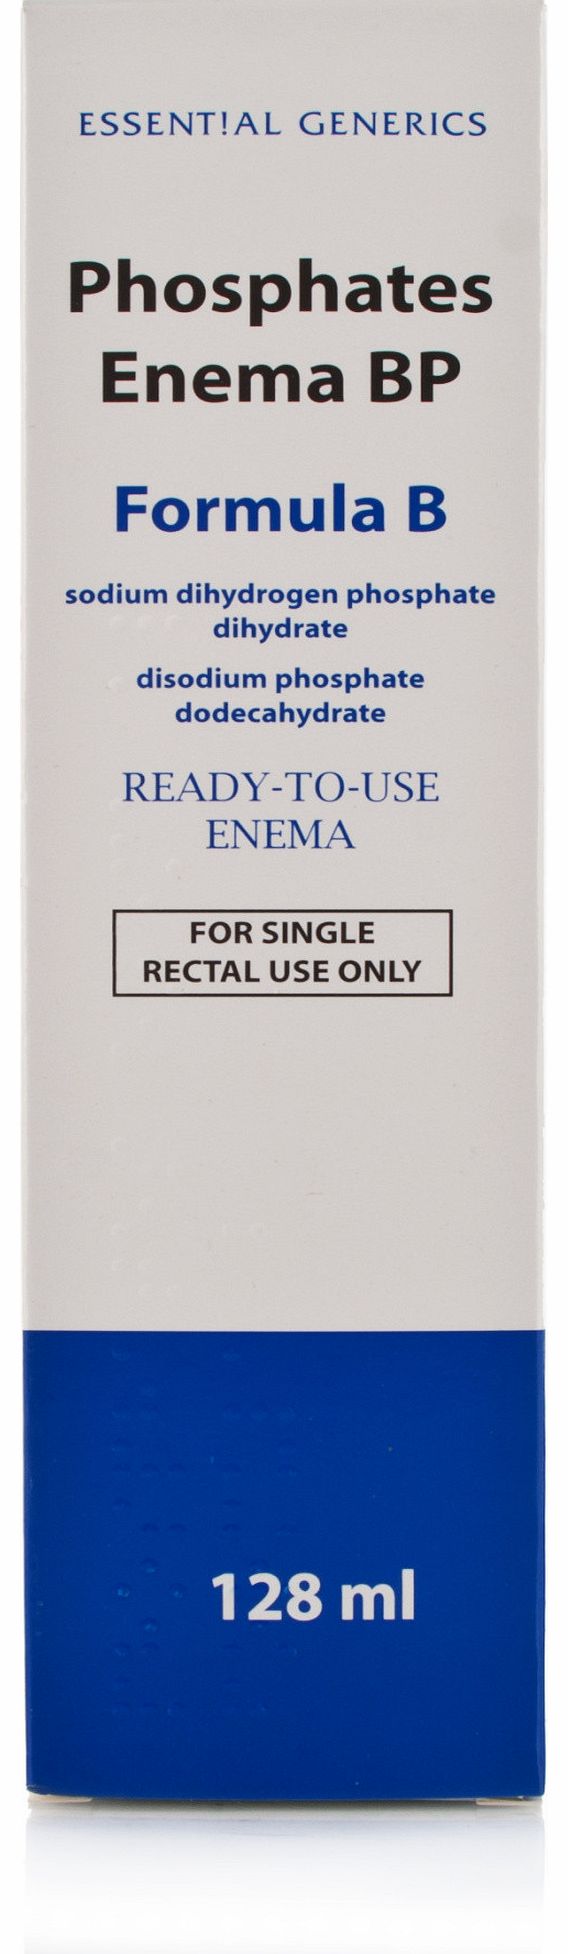 Phosphate Enema (Standard Tube) is ideal for individuals who suffer from constipation and works by drawing water into the bowel to encourage evacuation and soften stools. It may also be used to evacuate and clean the bowel before and after certain op